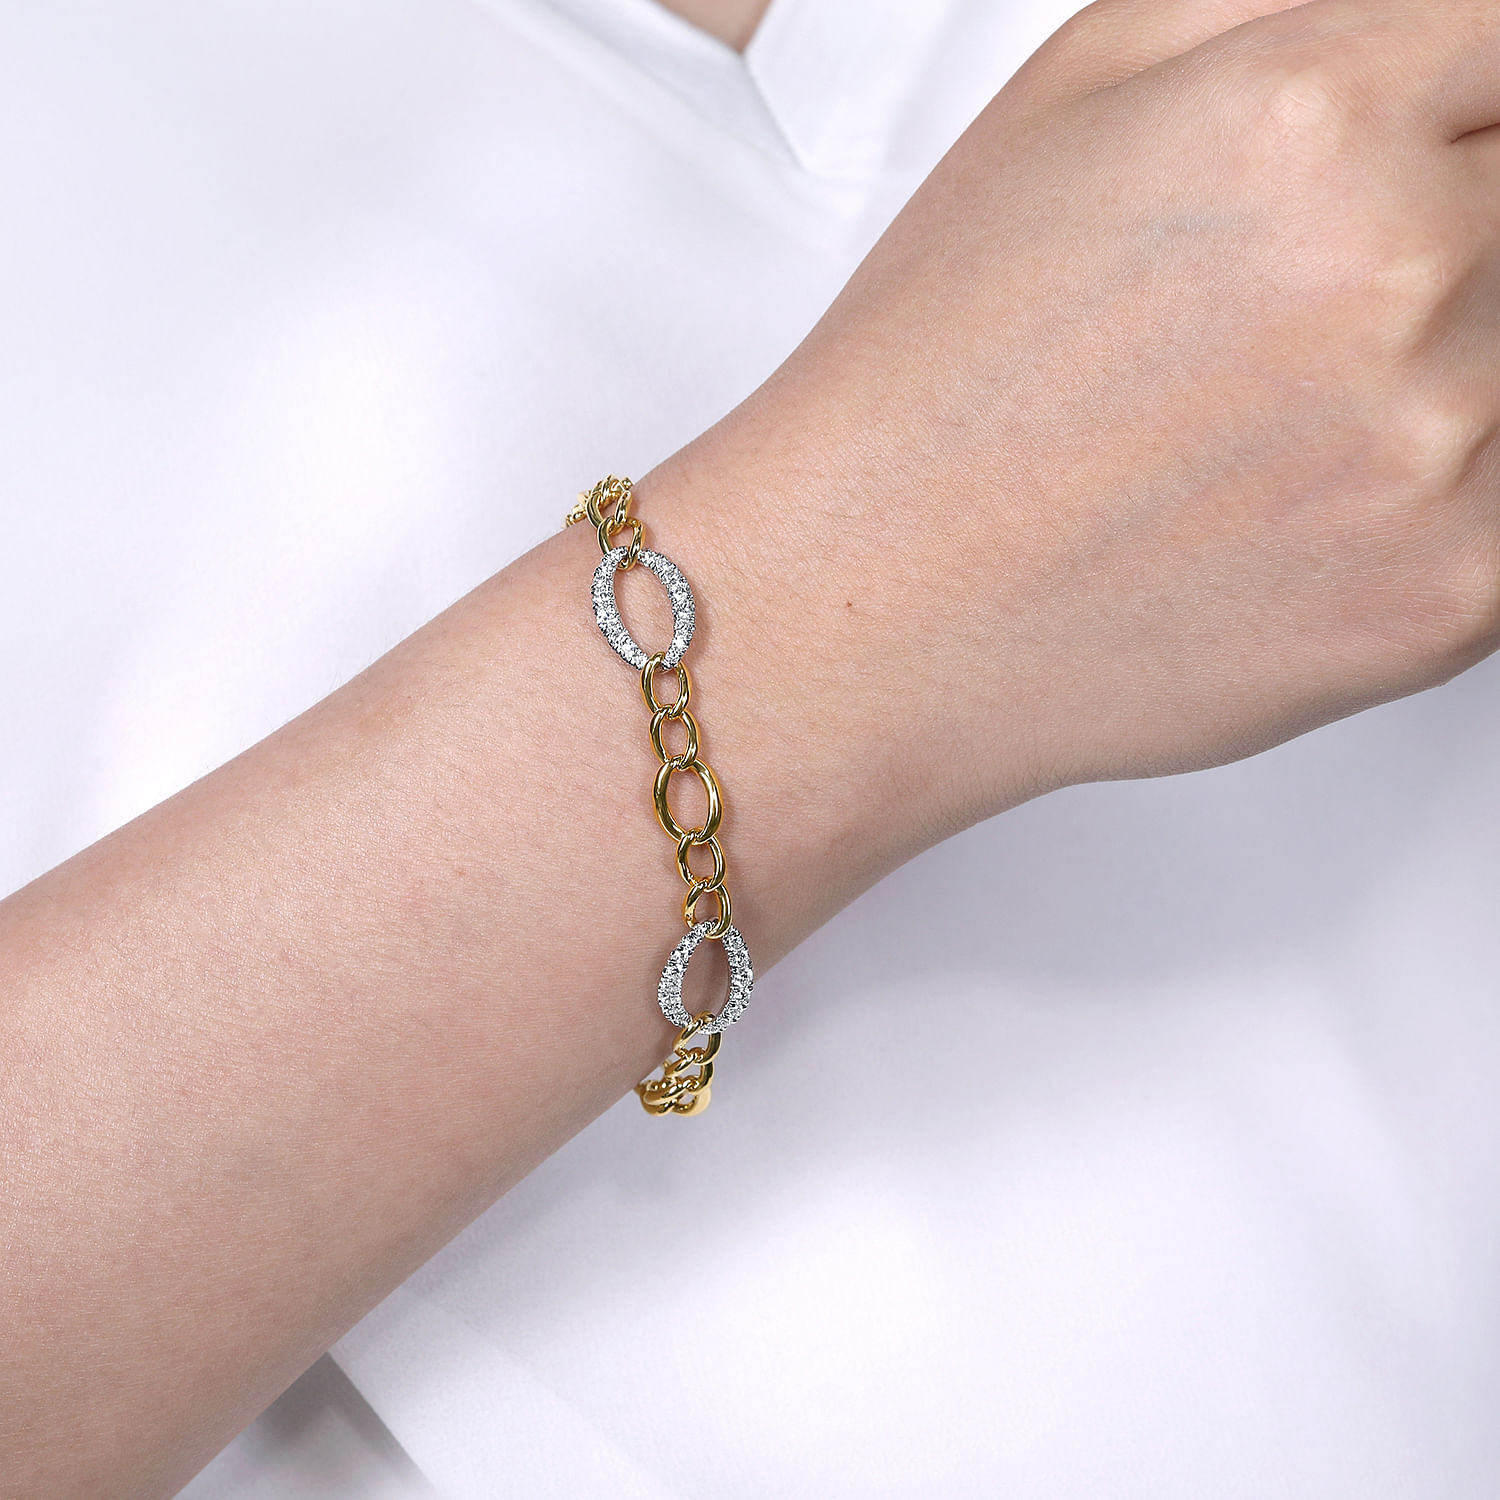 14K Yellow-White Gold Chain Link Bracelet with Diamond Pavé Oval Link Stations